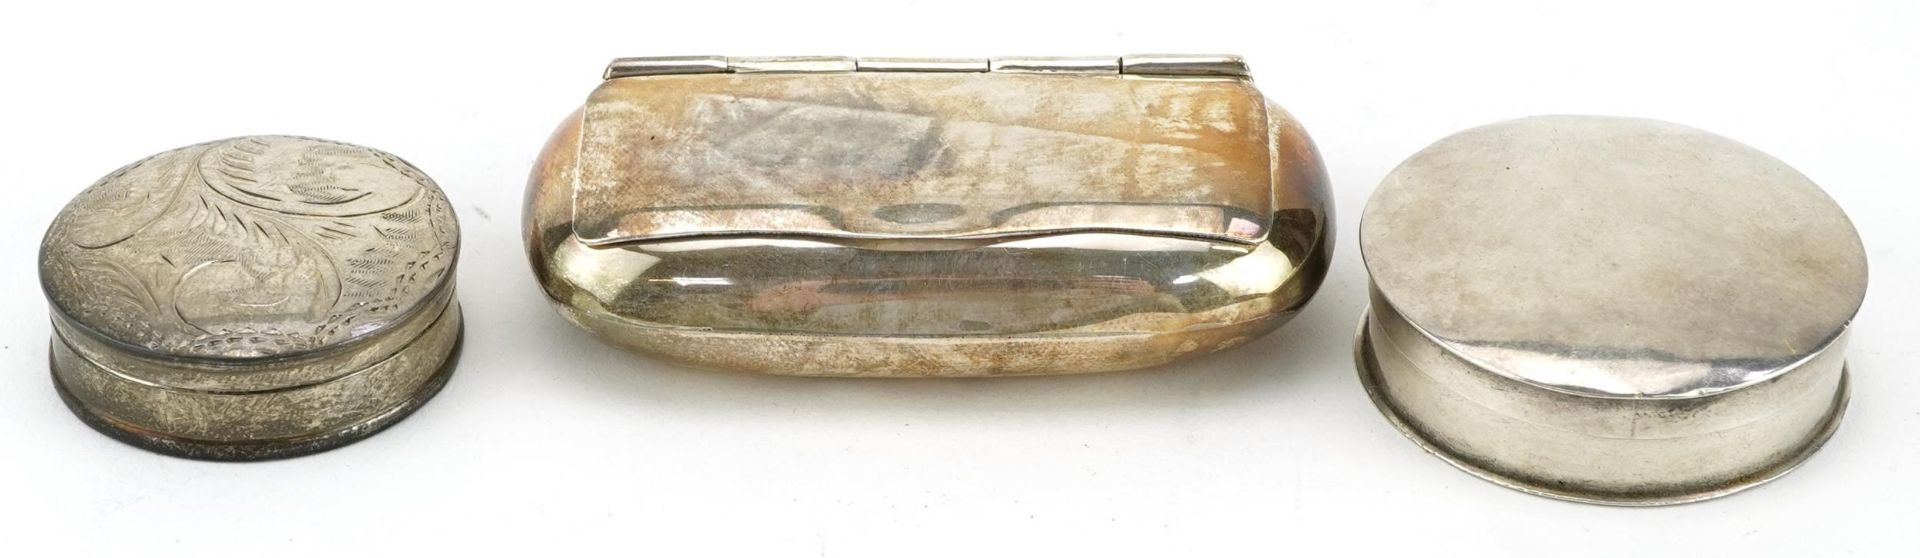 Two circular silver pillboxes and a silver snuff box, the largest 6.5cm wide, total 58.2g - Image 2 of 8